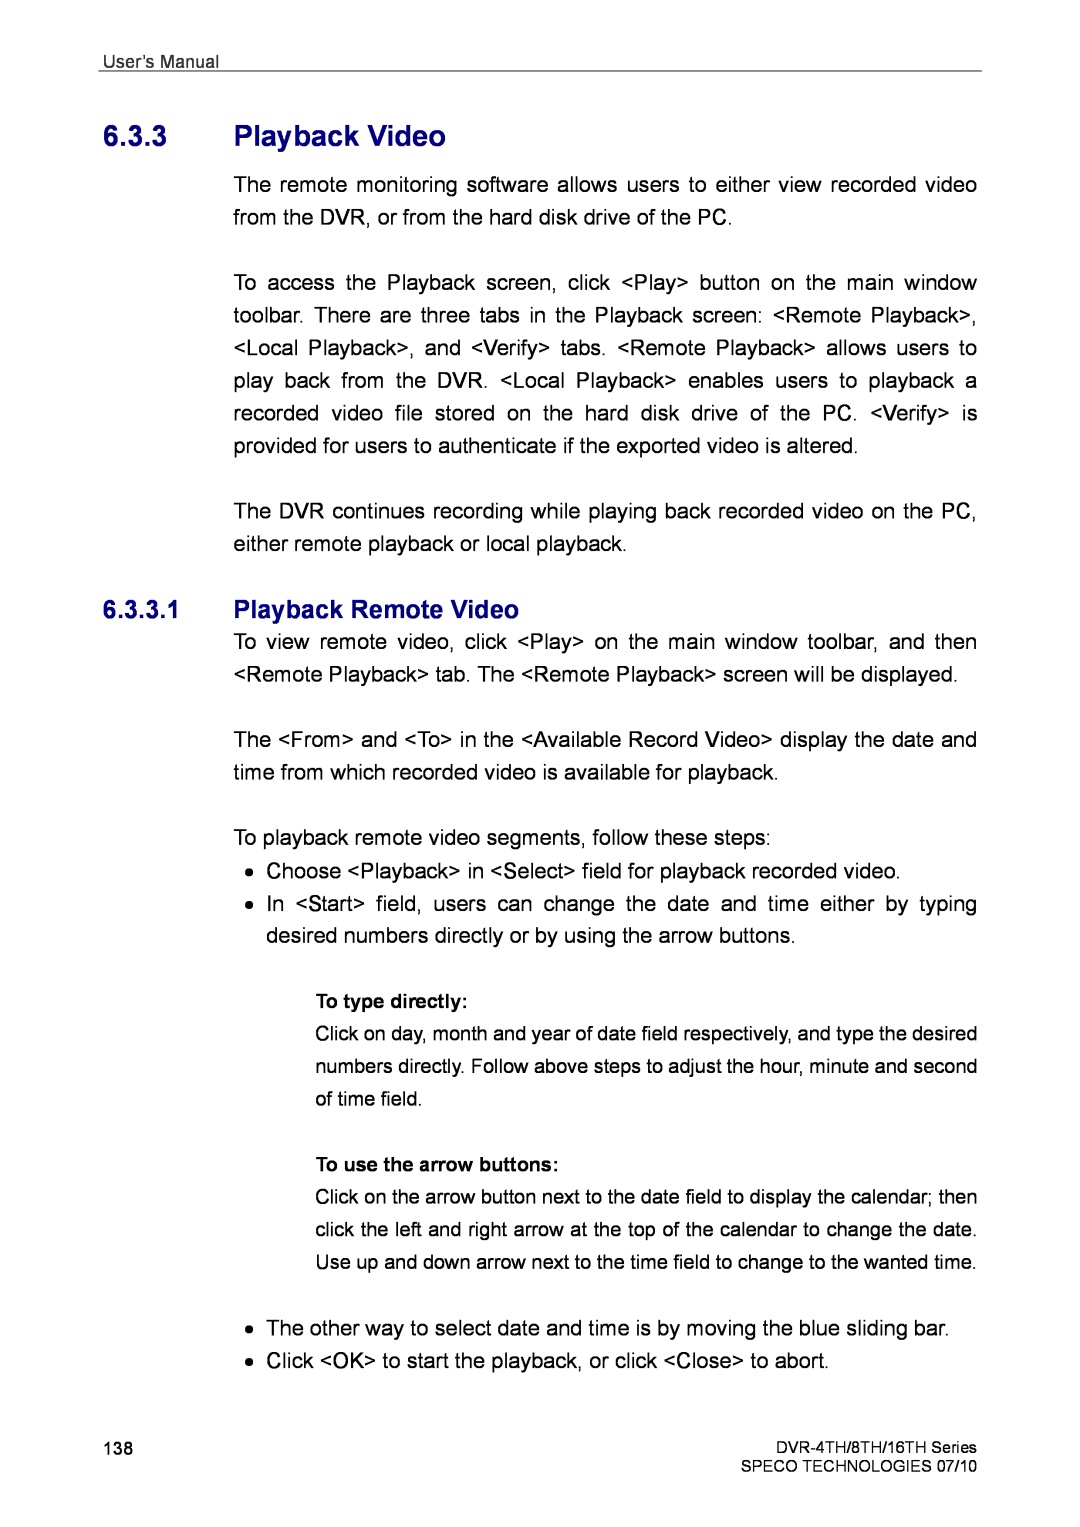 Speco Technologies 4TH, 8TH, 16TH user manual Playback Video, Playback Remote Video 